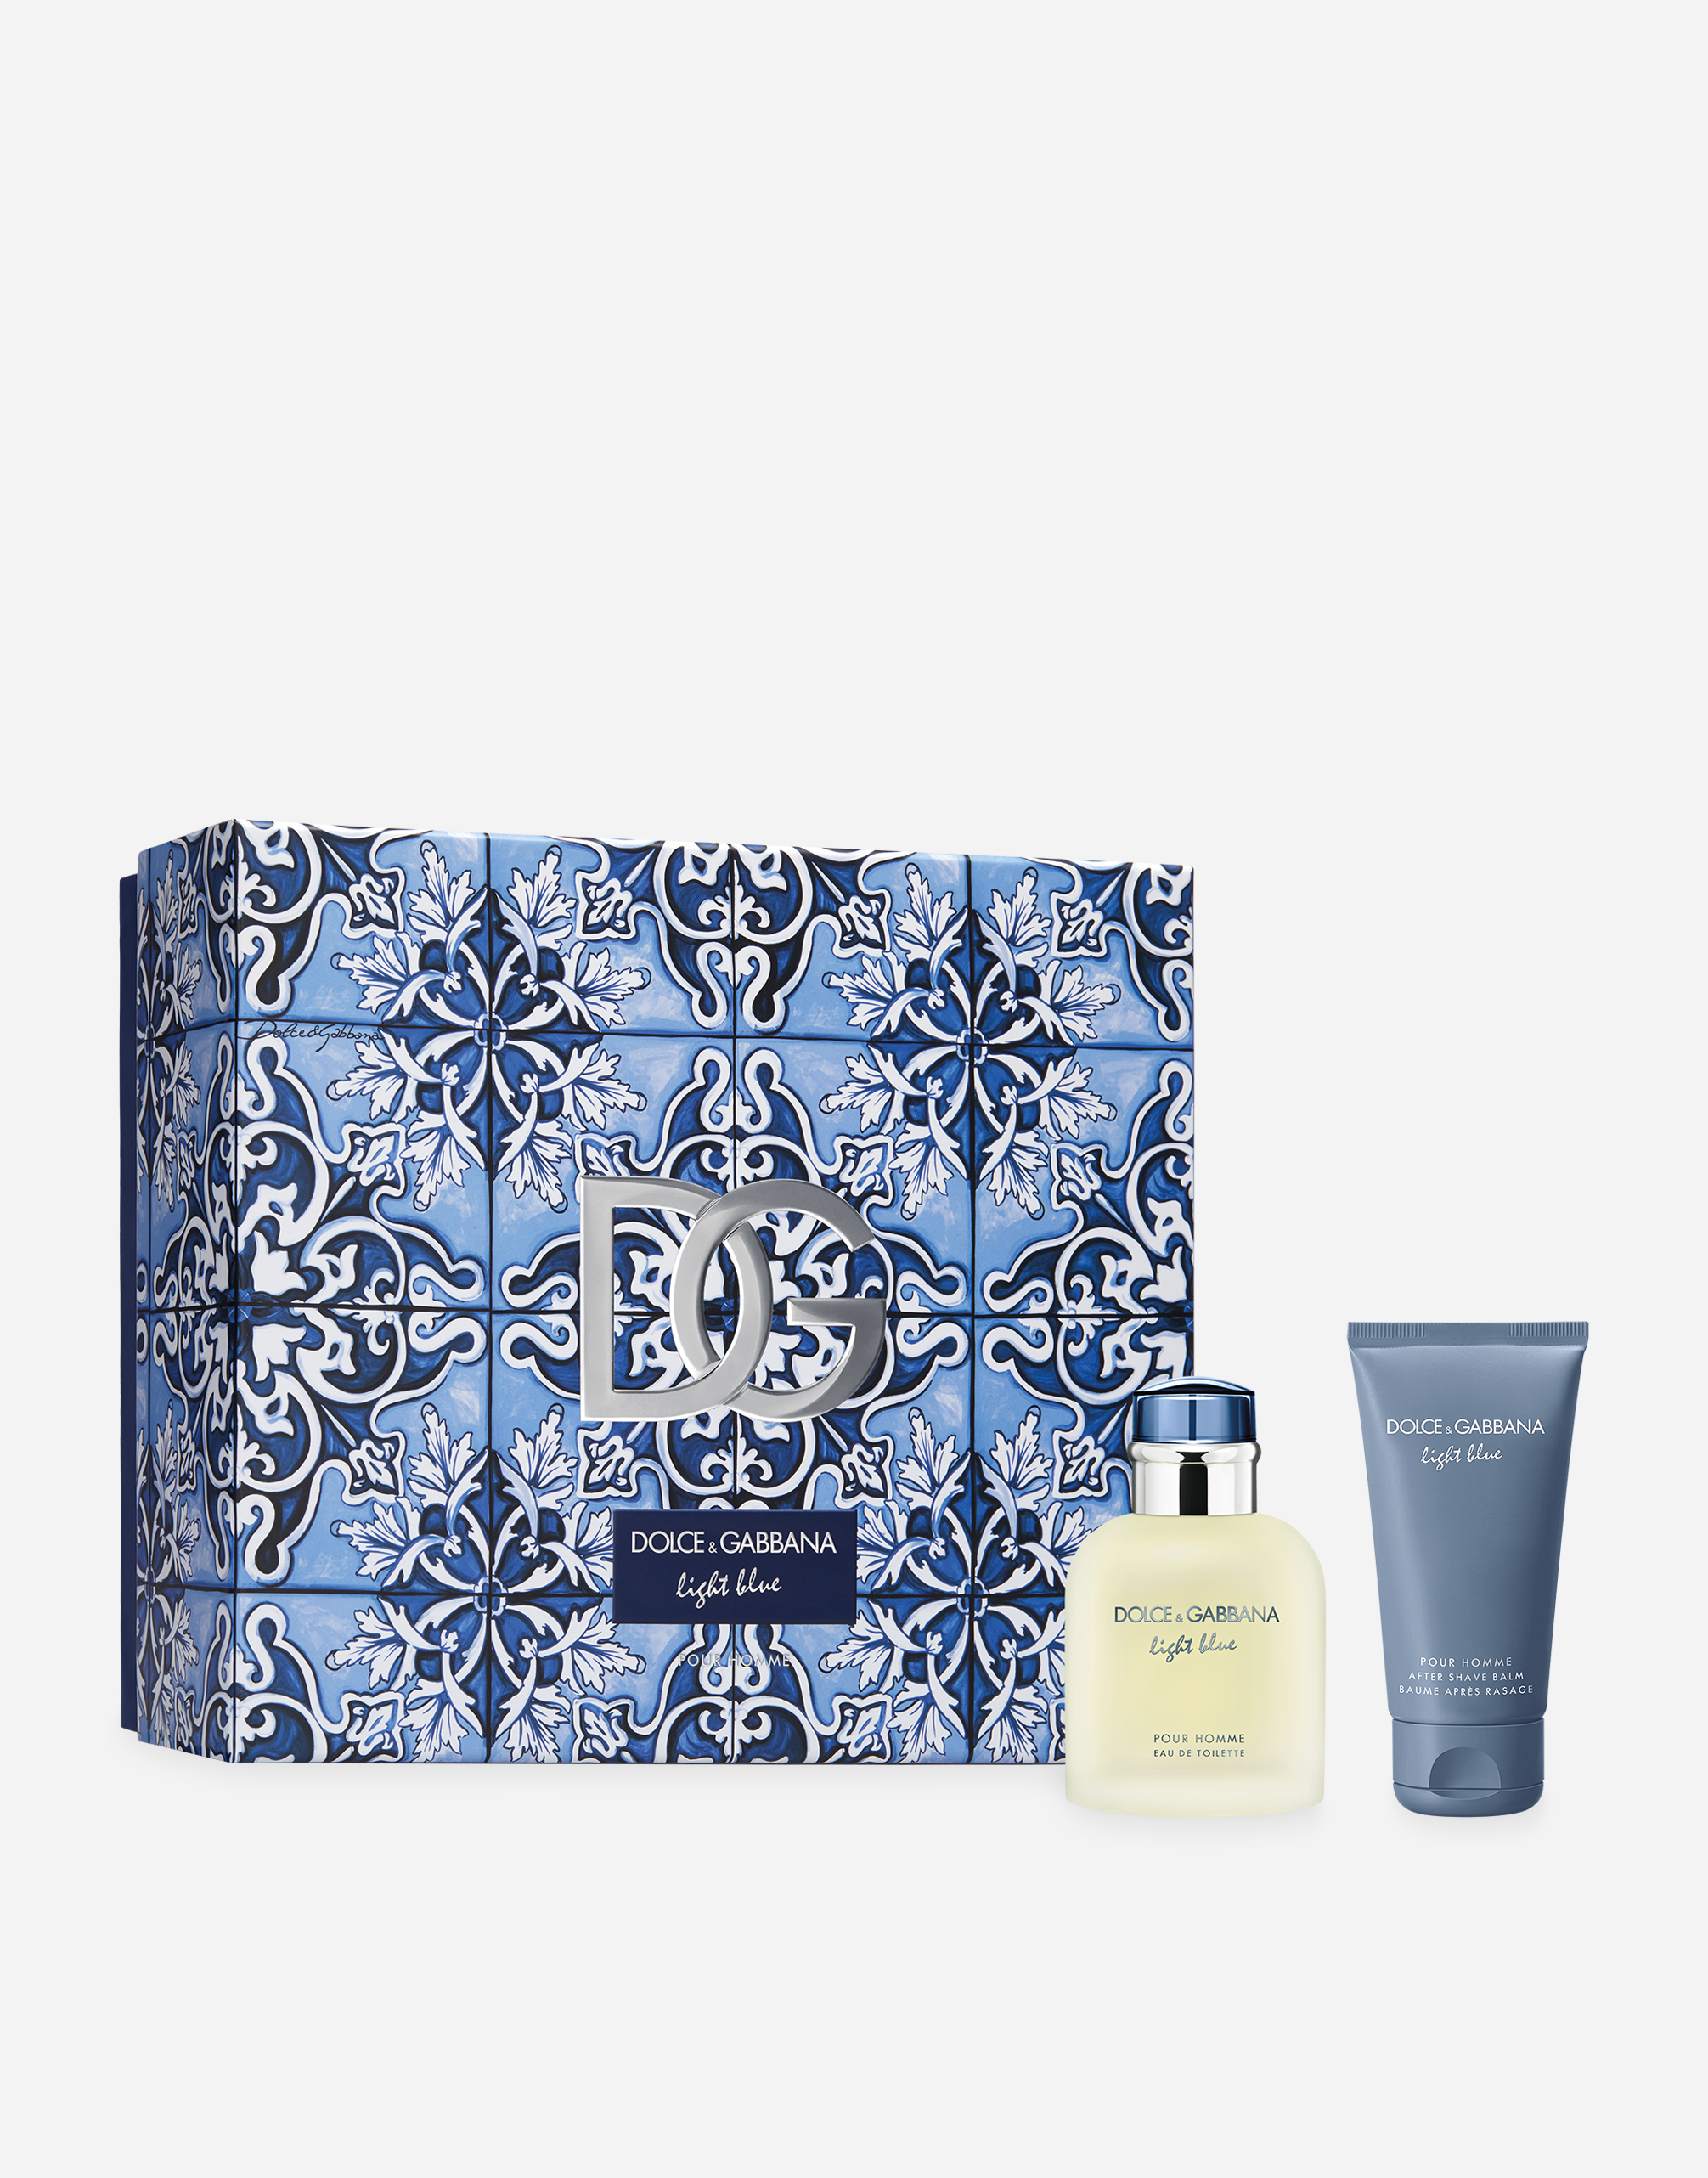 Light Blue Pour Homme Gift Set by Dolce&Gabbana Beauty